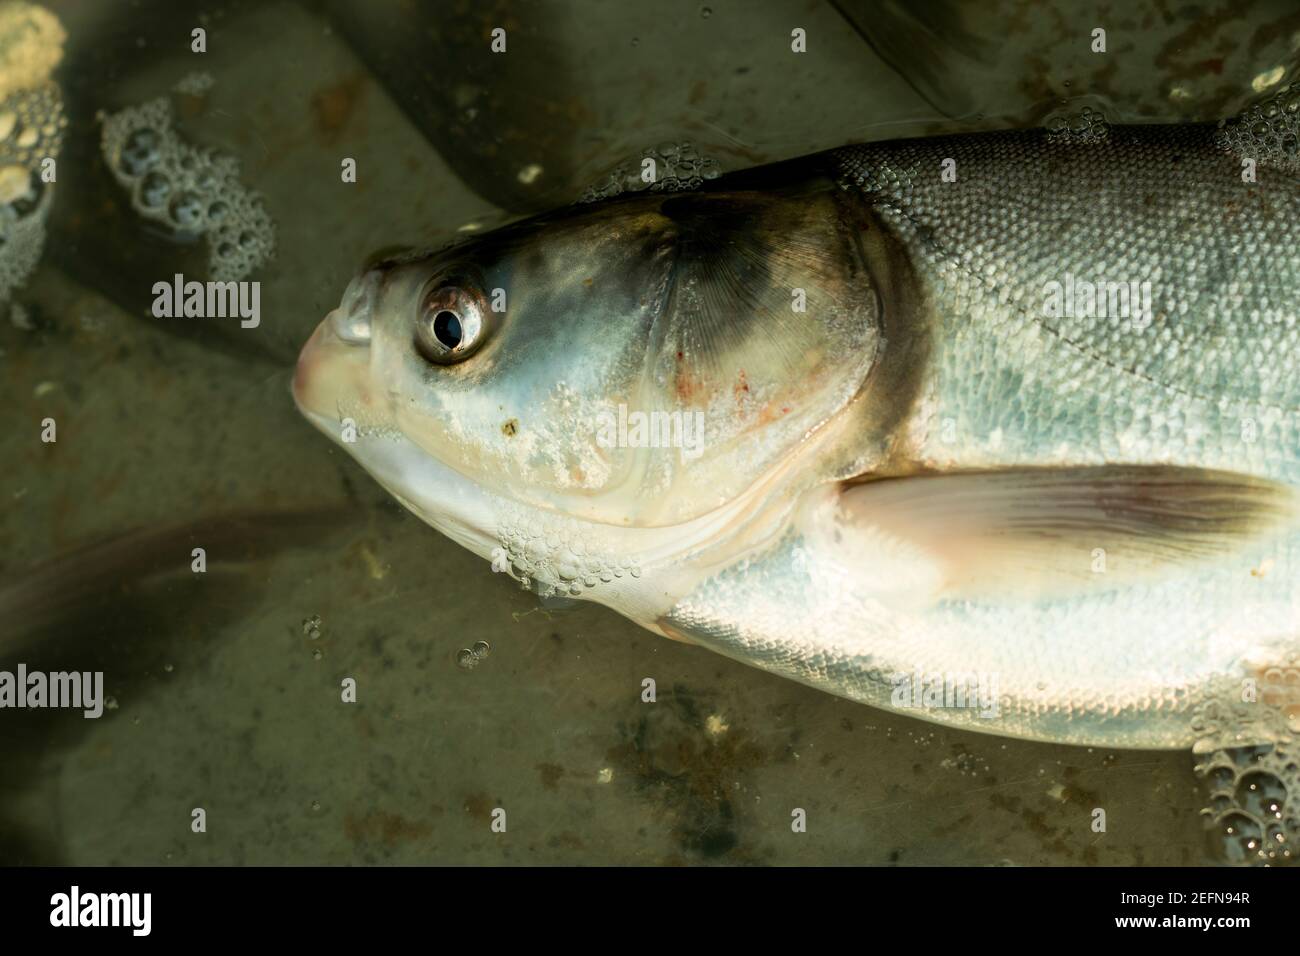 Hypophthalmichthys molitrix or the silver carp is a species of freshwater cyprinid fish, a variety of Asian carp native Stock Photo